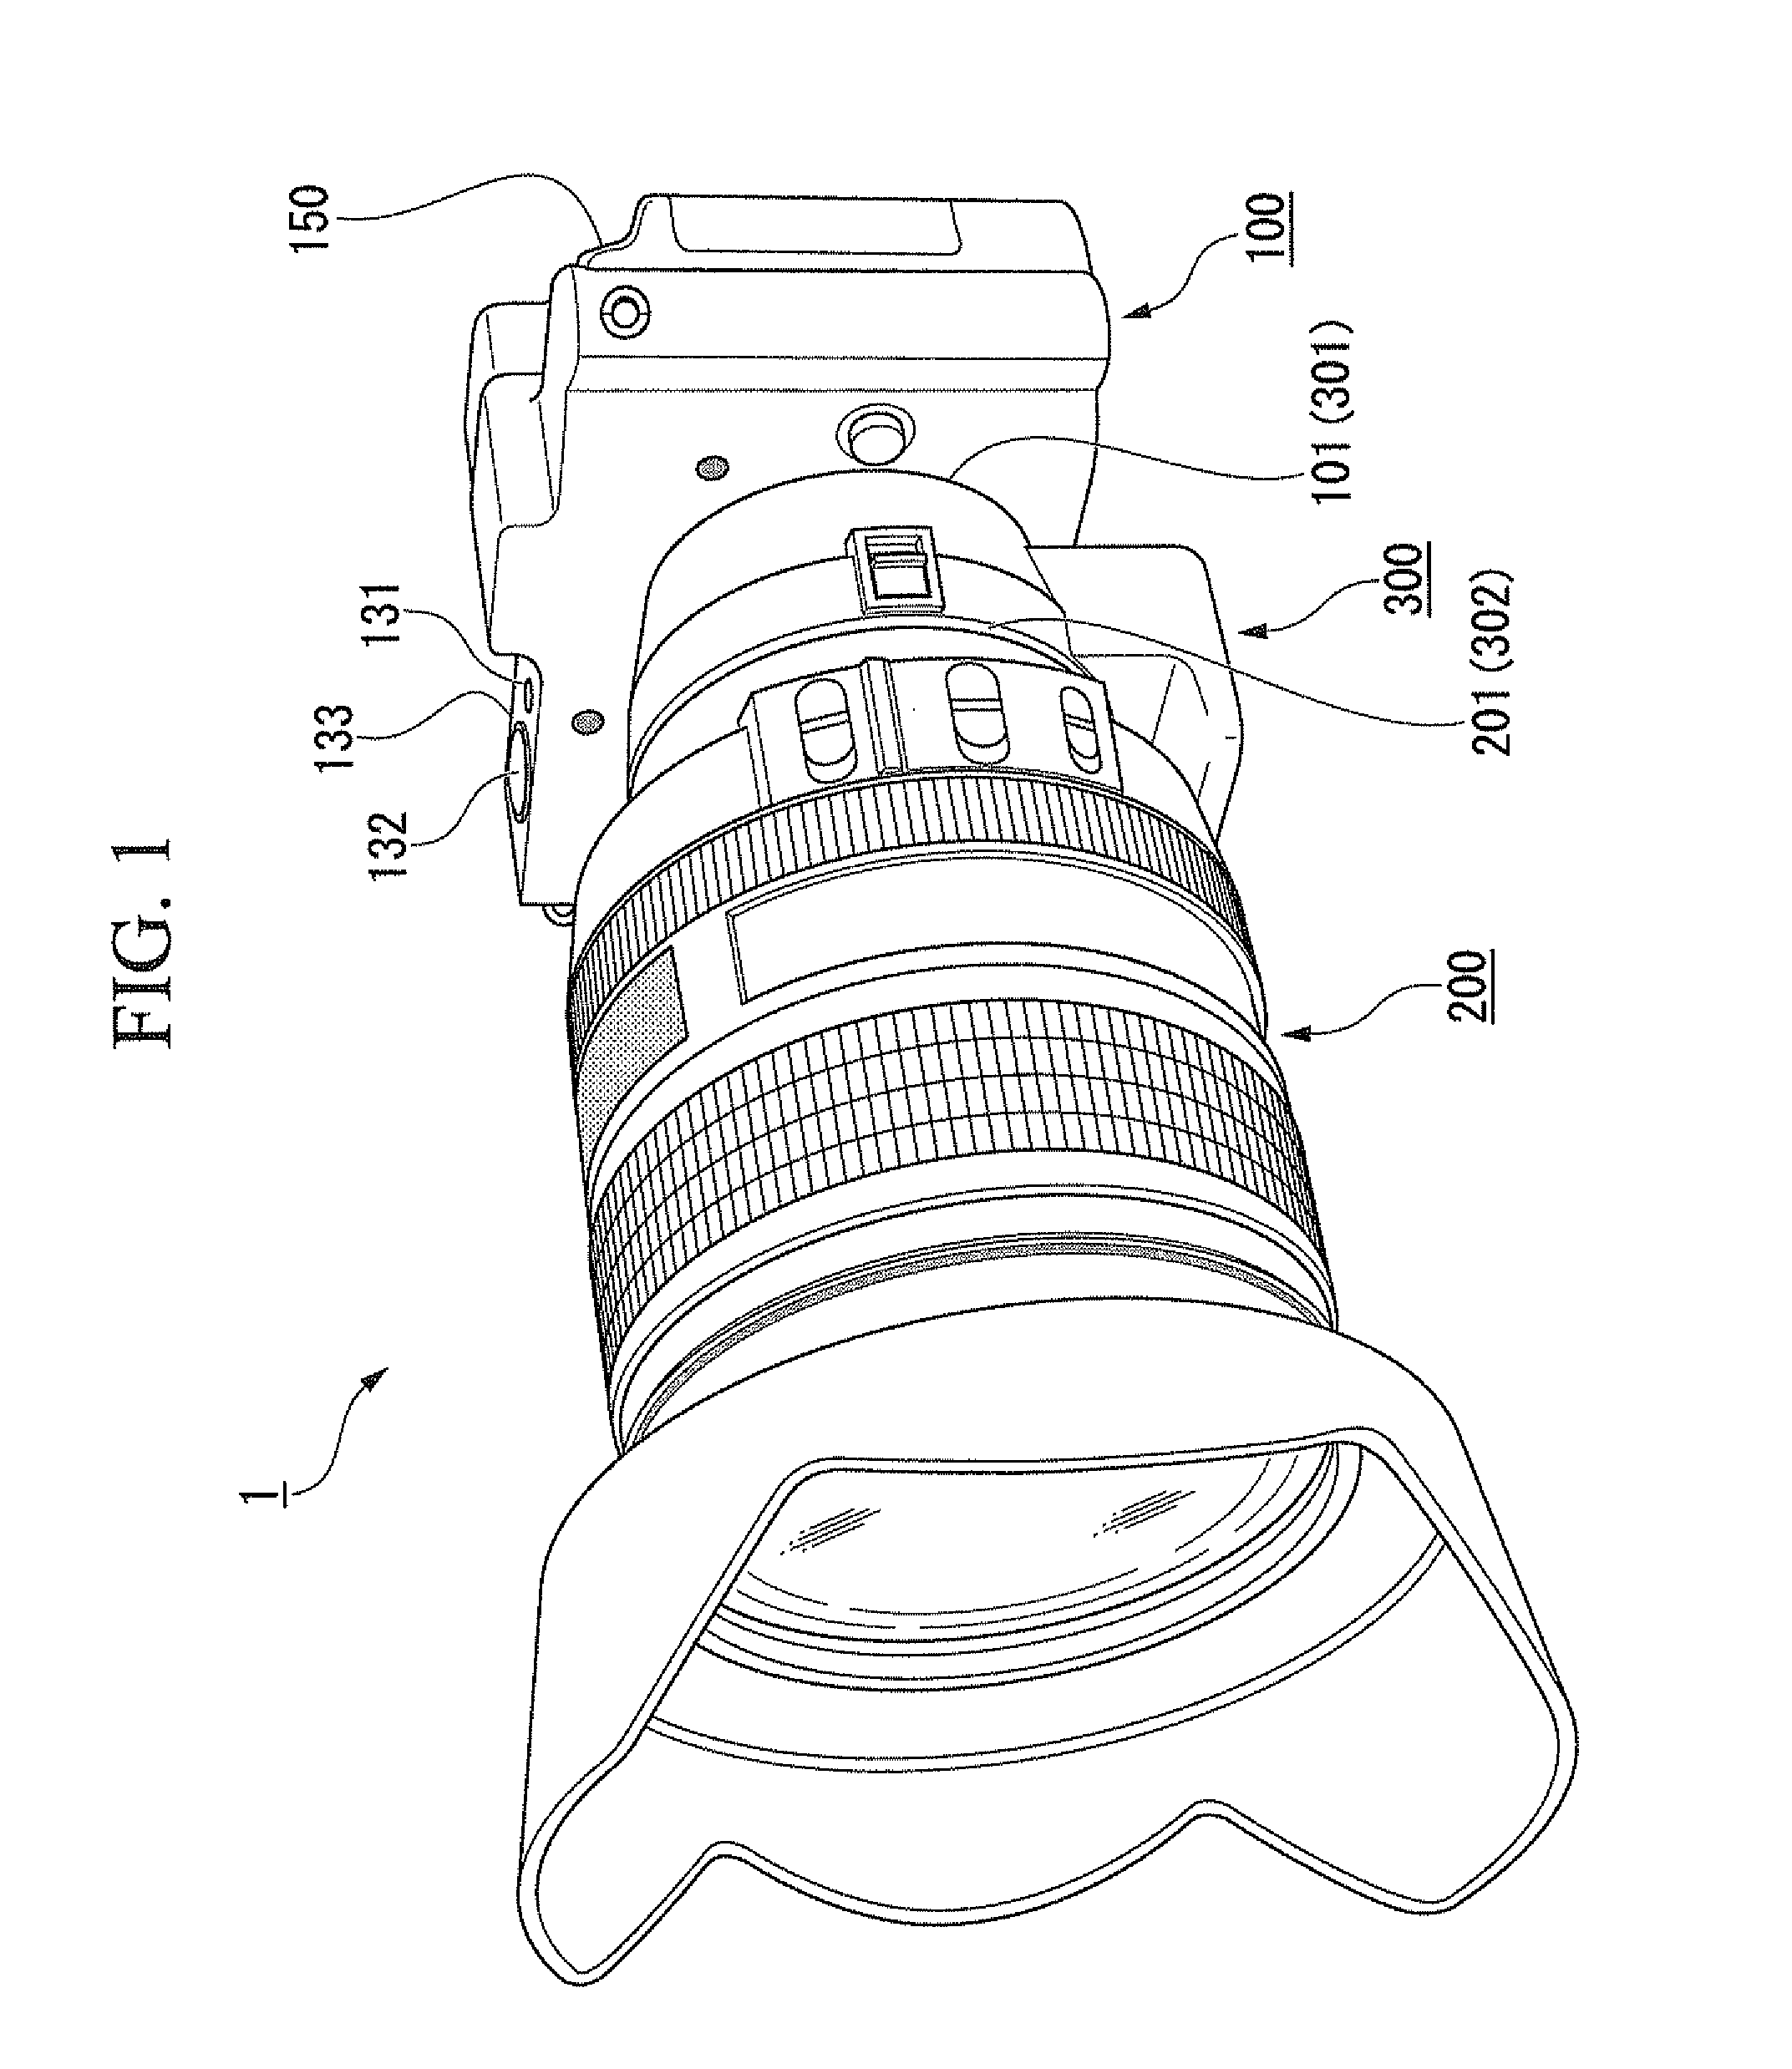 Adapter, camera system, and adapter control program